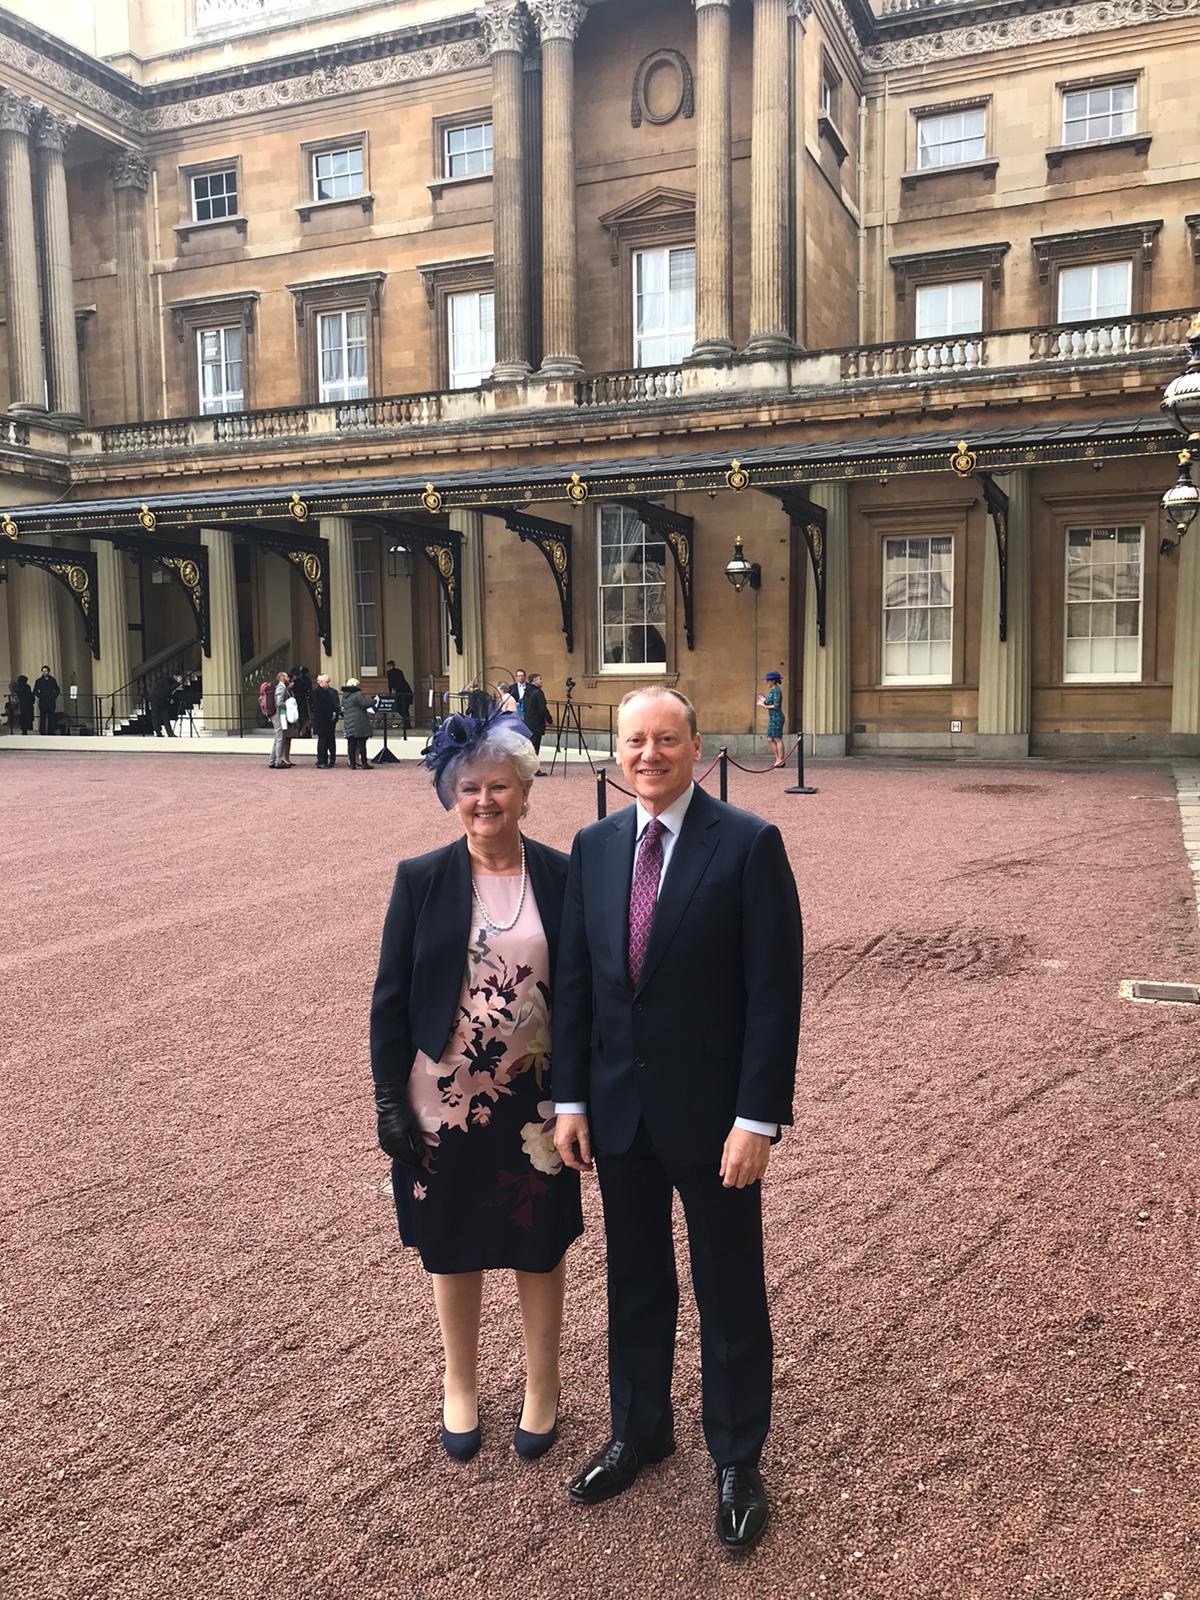 Gov Martyn and Wife at Buckingham Palace 2